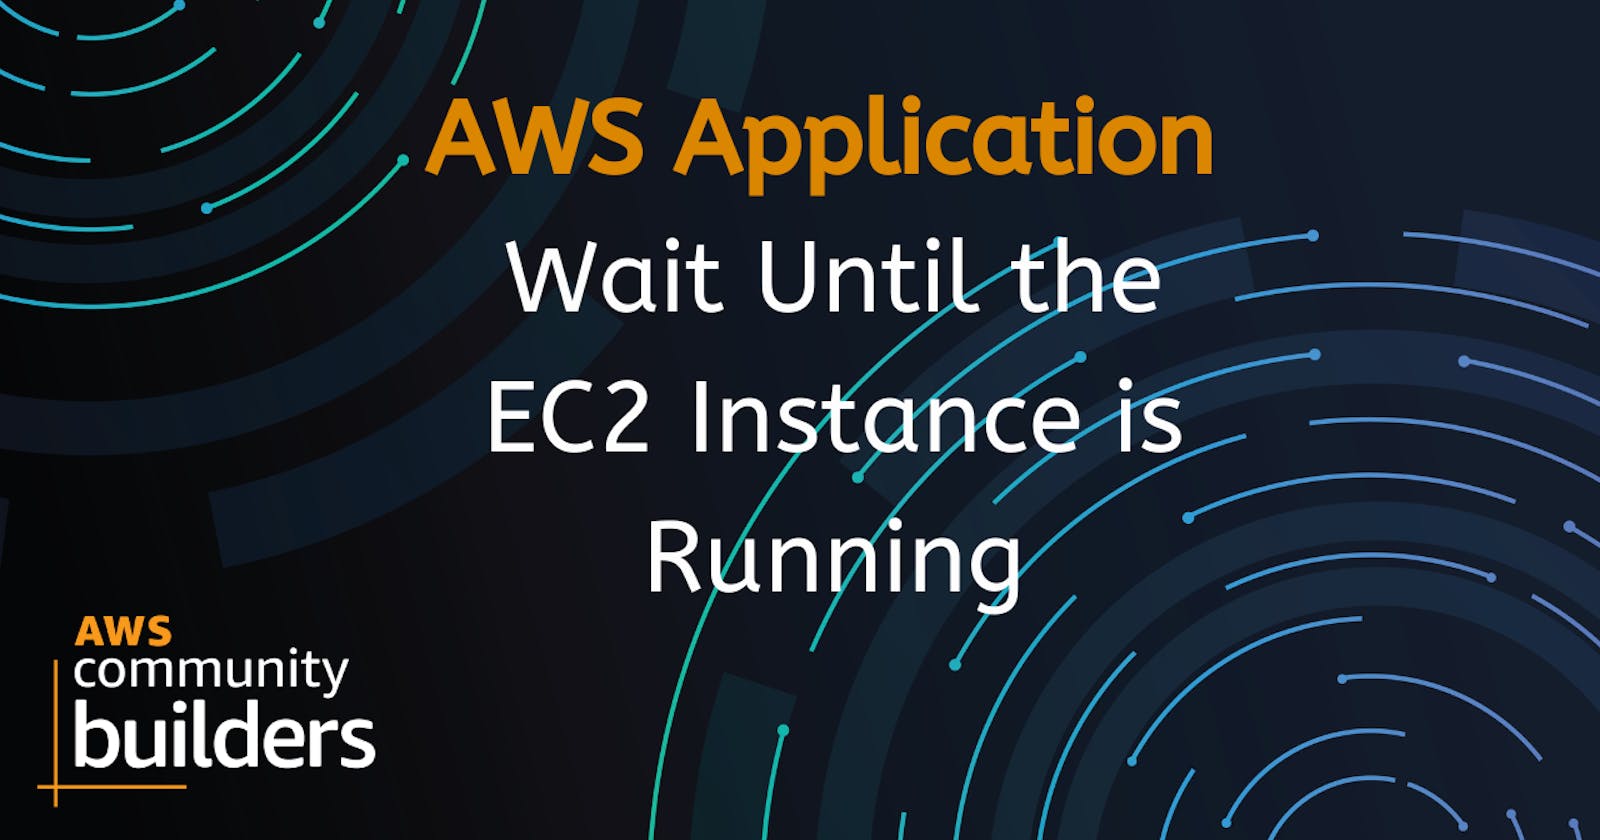 Managing EC2 Instances in Go: Waiting for the Instance to Start Running